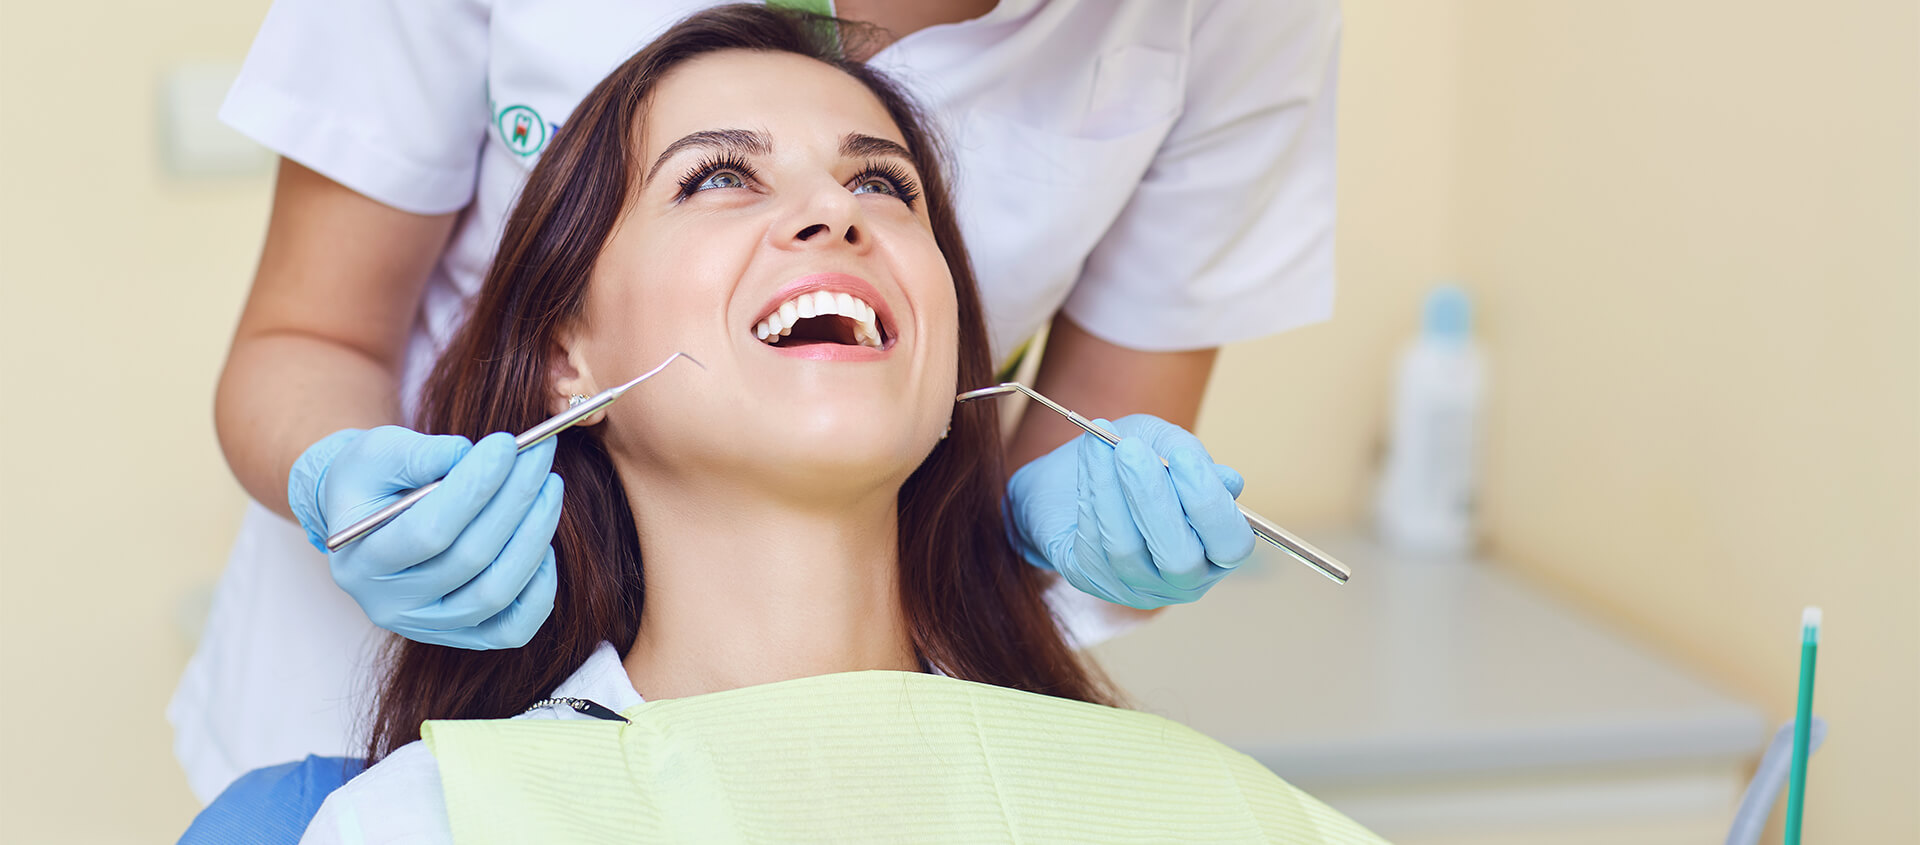 Dental Hygiene Appointment in Middletown IN Area